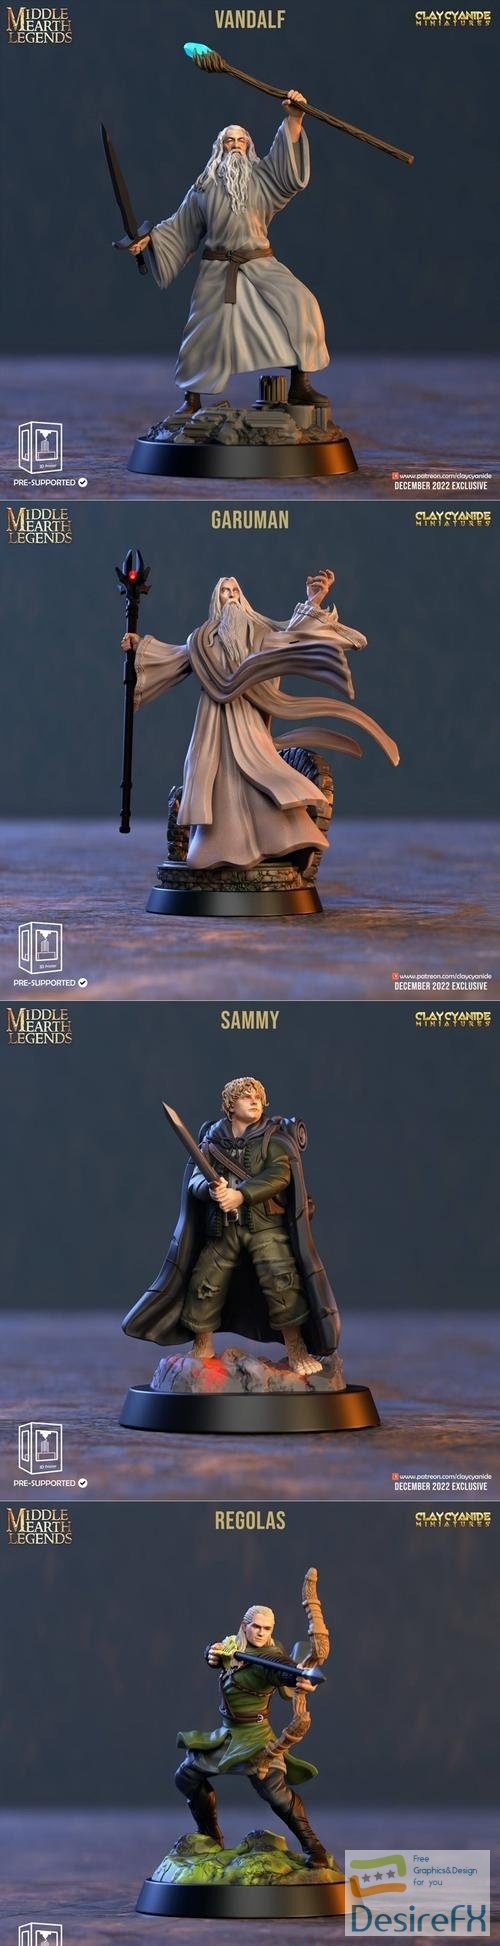 Clay Cyanide Miniatures - Gandalf and Saruman and Samwise and Legolas – 3D Print